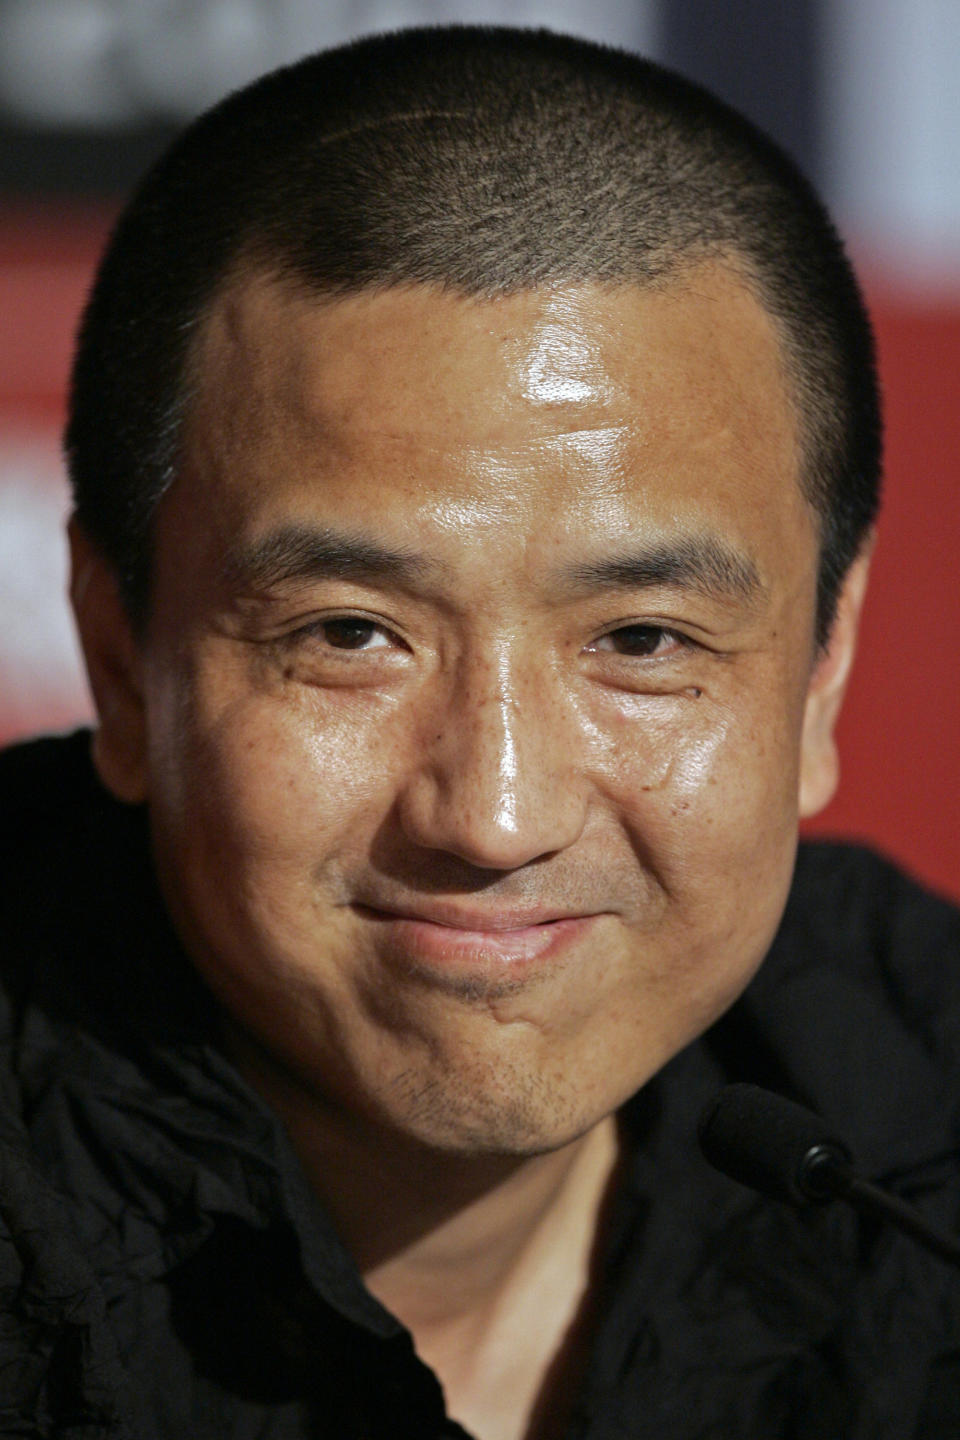 FILE - In this May 14, 2009 file photo, Chinese director Lou Ye smiles during a press conference at the 62nd International Cannes Film Festival in Cannes, southern France. Lou's new dark melodrama titled "Mystery" is heading the list of entries in the best film category at Taiwan's 49th Golden Horse Film festival - the Chinese-language Oscars - catapulting the mainland cinema to center stage at this Nov. 24 2012 event. (AP Photo/Lionel Cironneau/File)